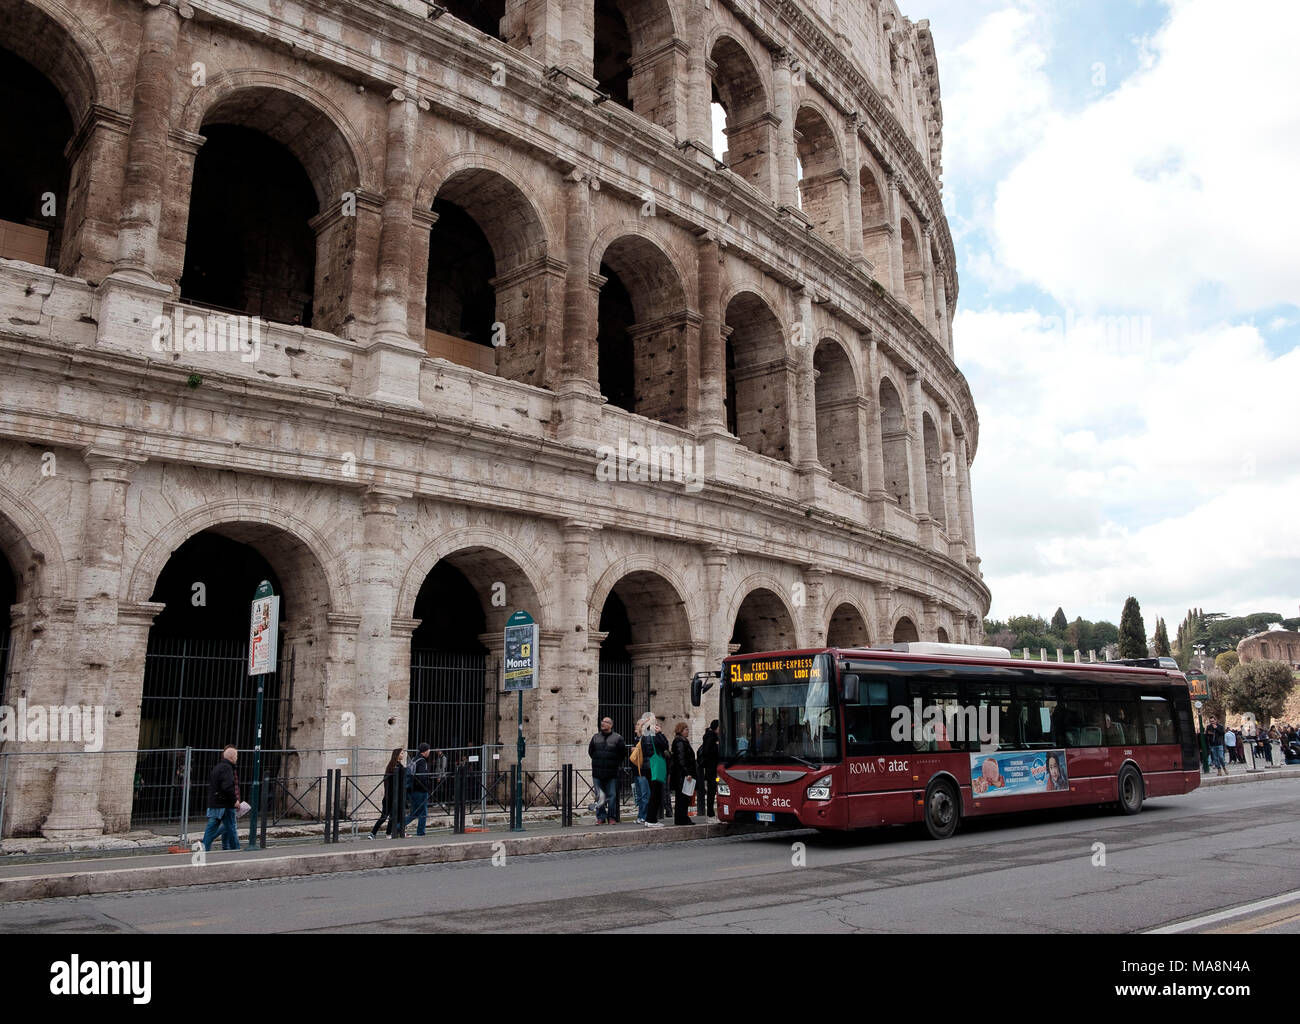 The 51 local bus service of Rome stopping outside The Colosseum Stock Photo